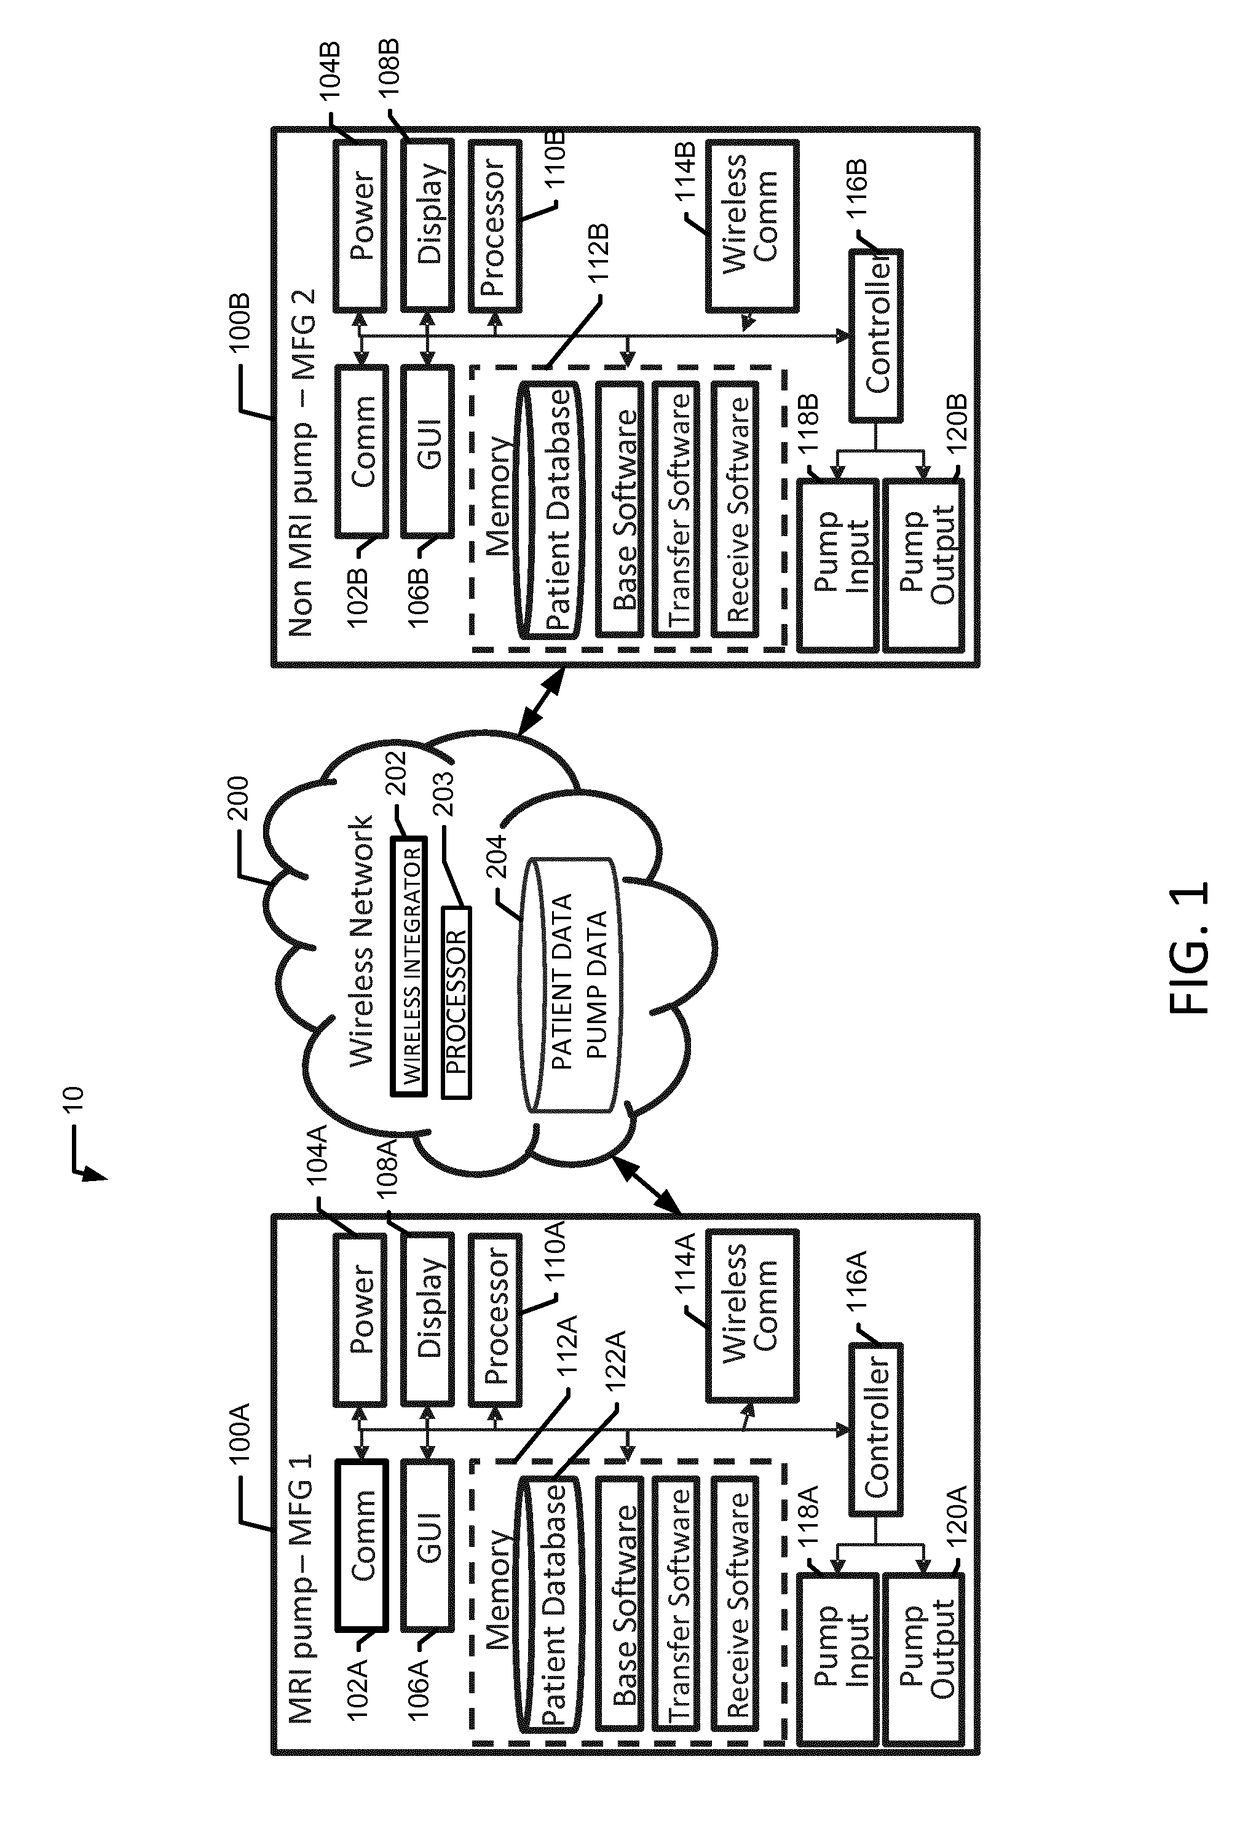 Automatically communicating between a non-MRI compatible iv pump and a MRI compatible iv pump